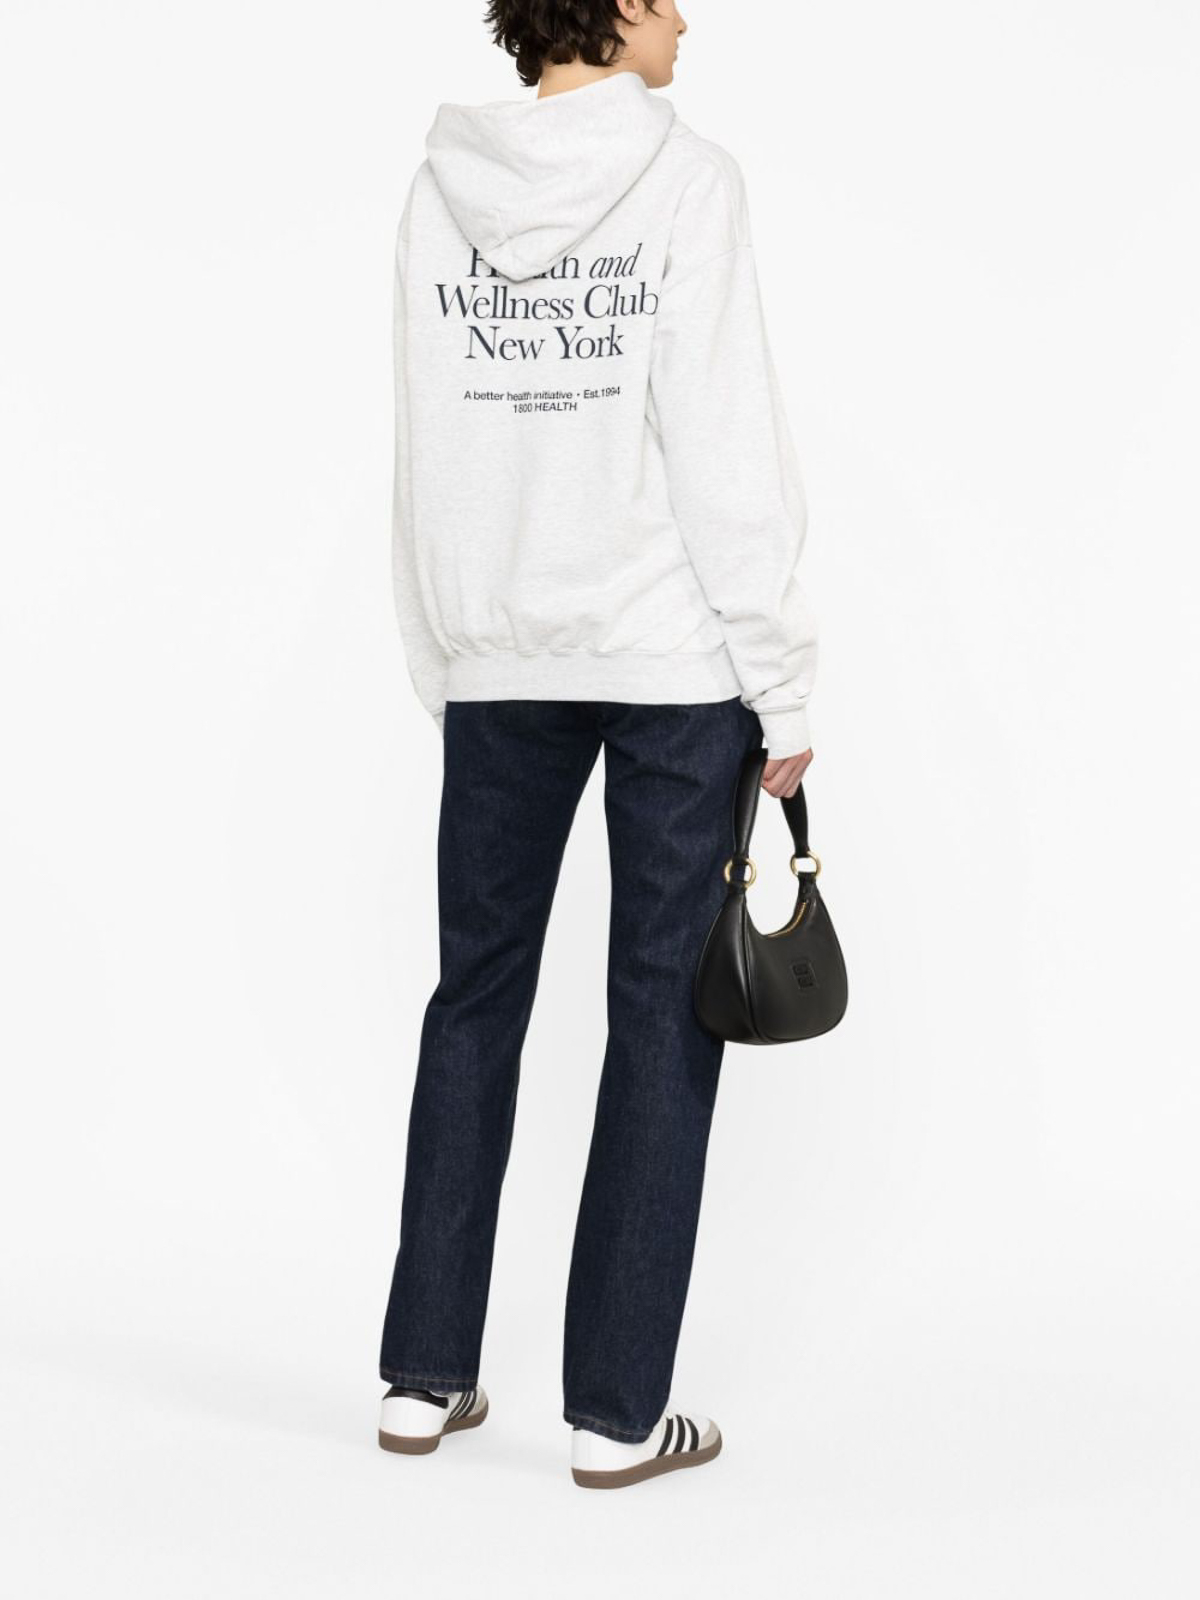 Women's Hoodie With Hwcny Print by Sporty Rich